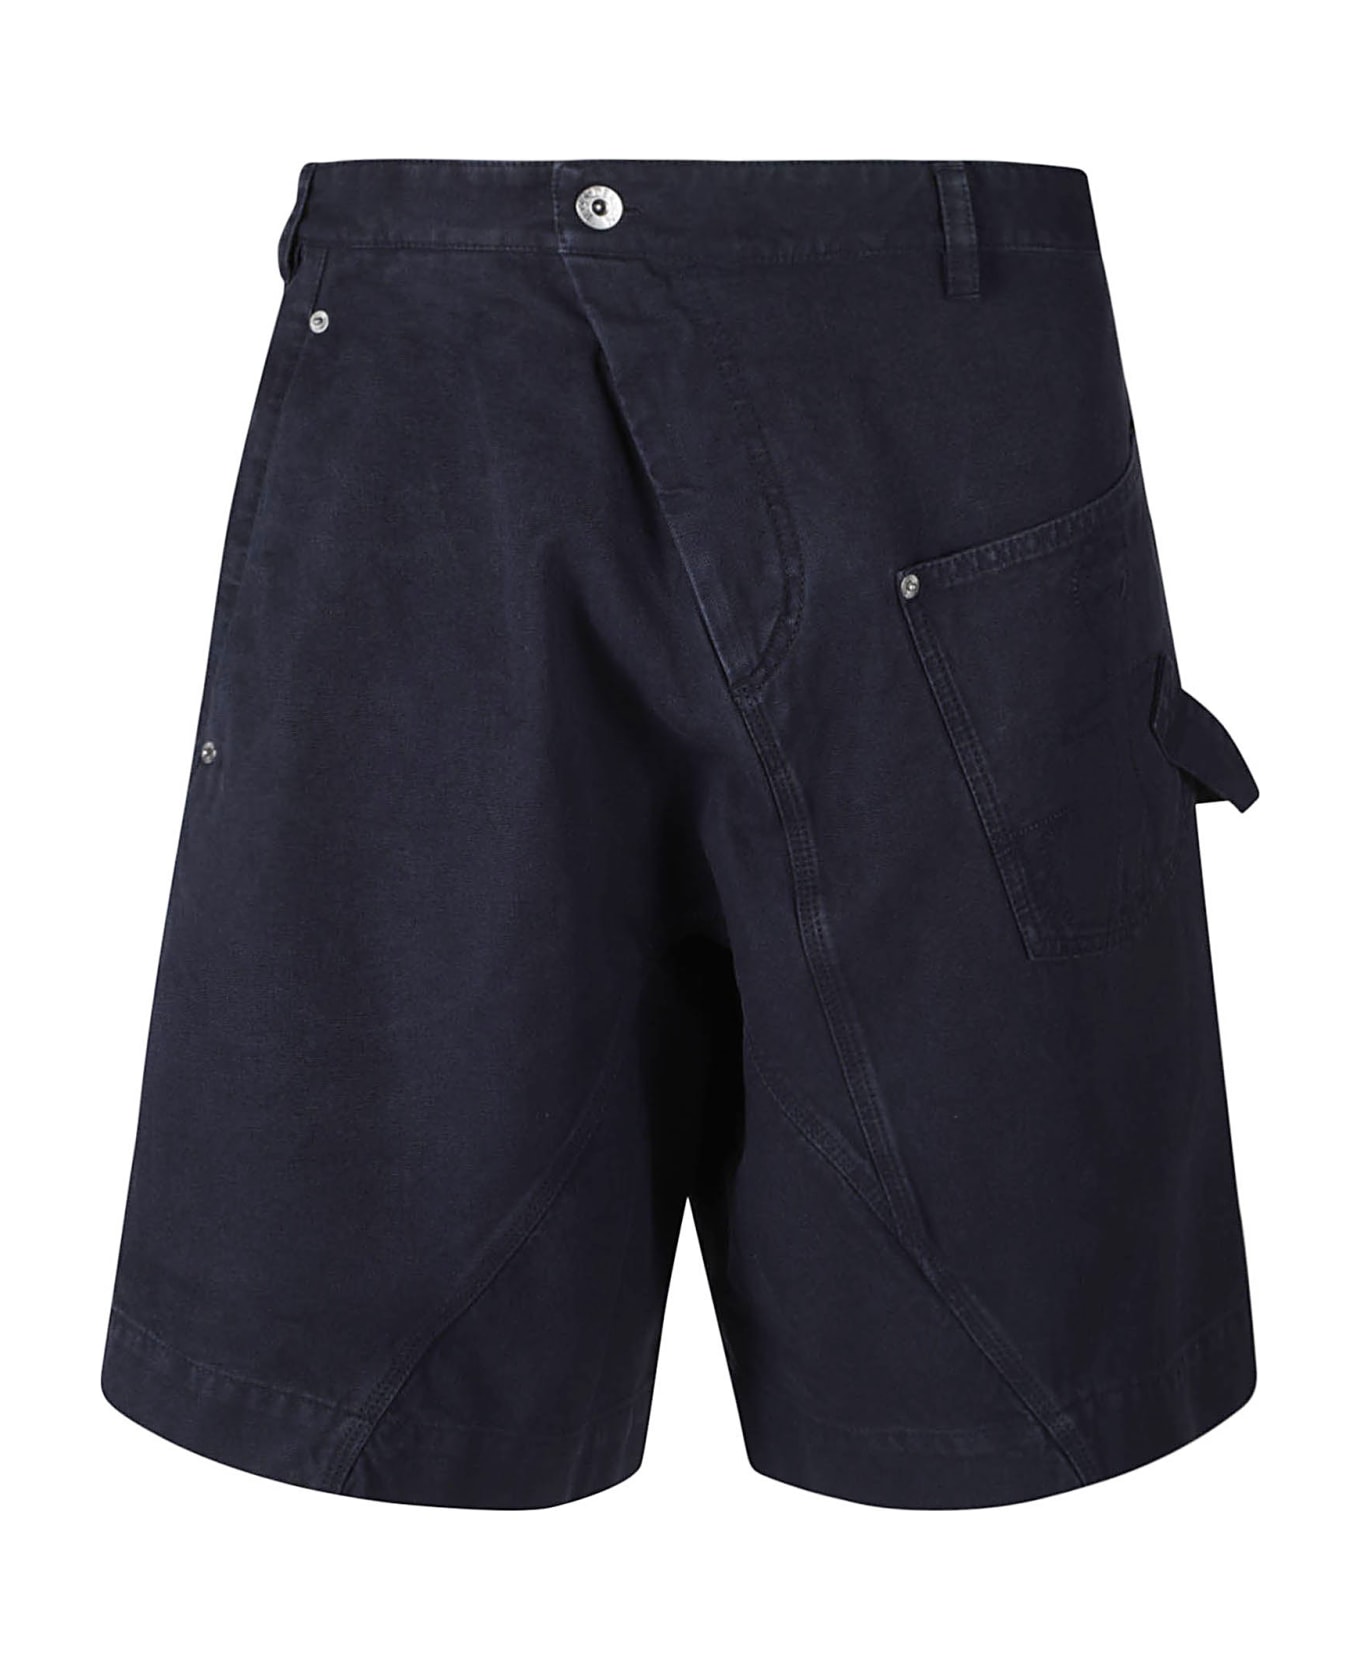 J.W. Anderson Twisted Shorts - Navy ショートパンツ